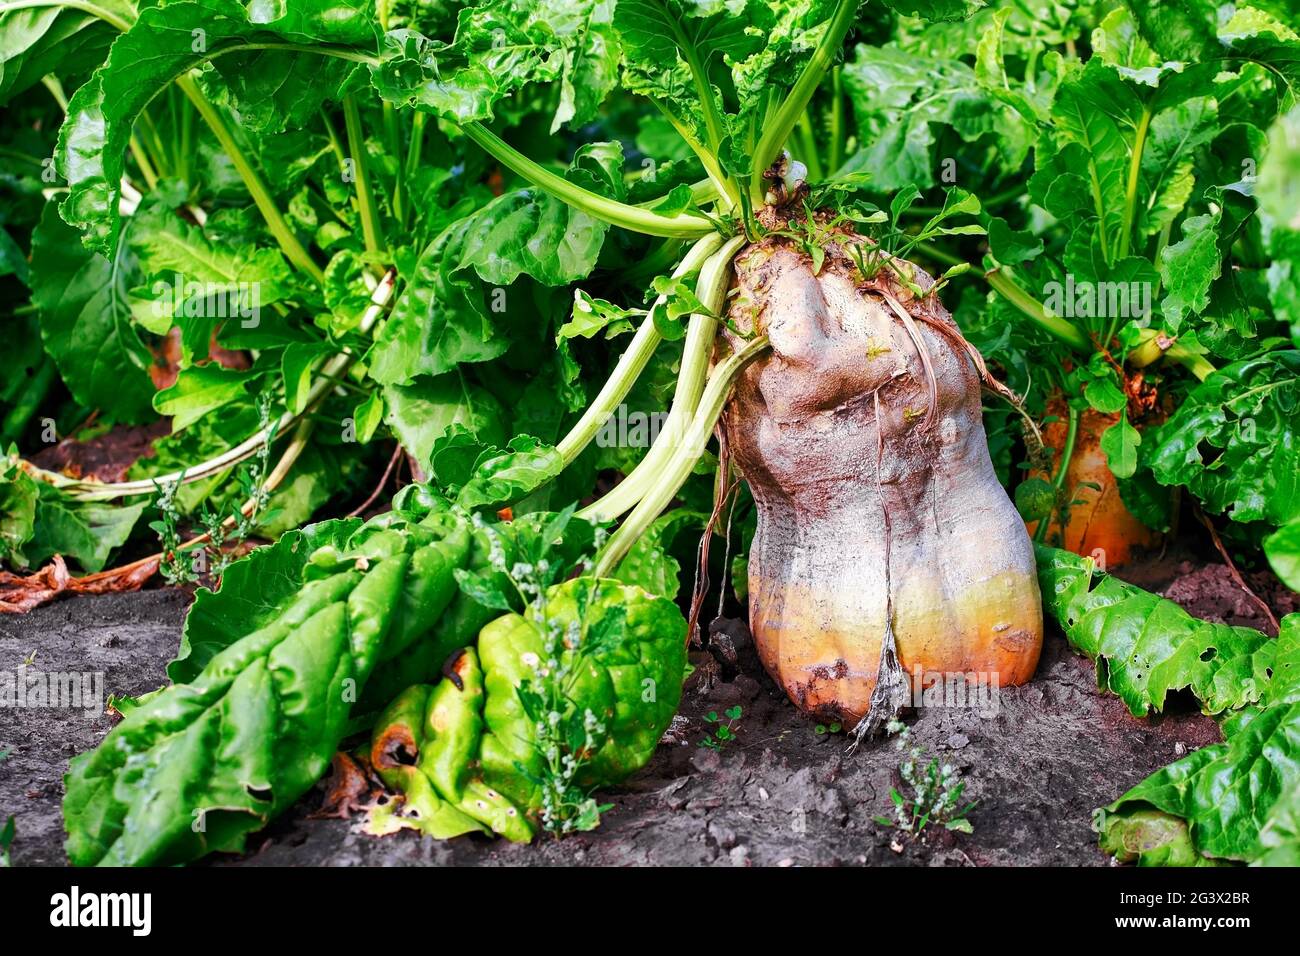 This is a turnip with green leaves on a bed in the garden close-up. Stock Photo